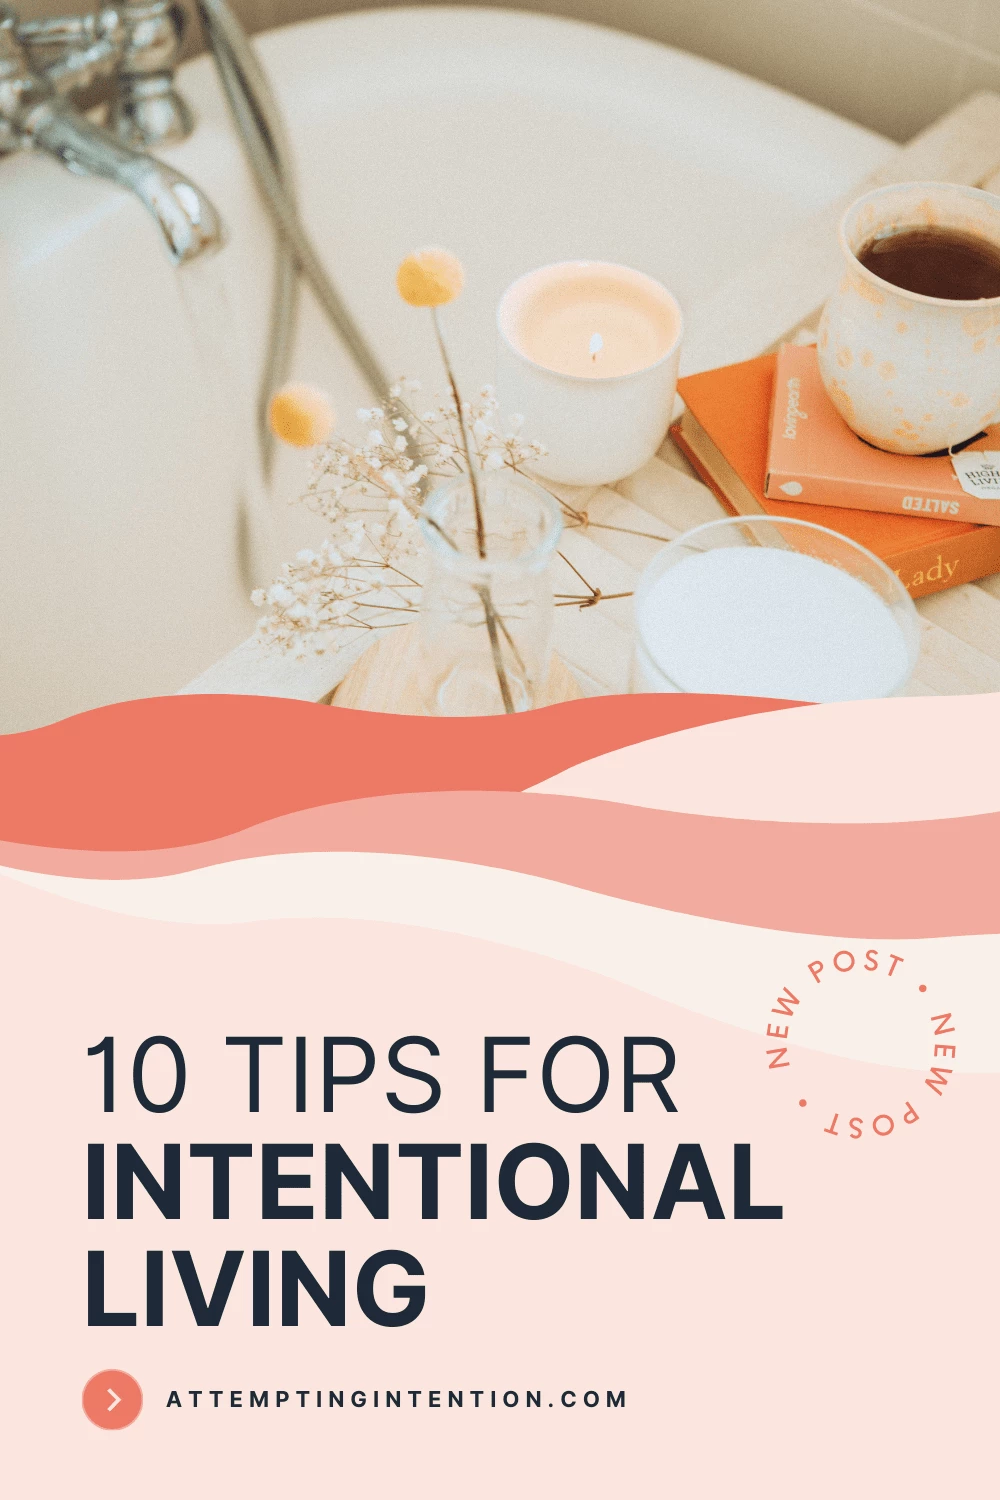 10 tips for intentional living - new post at attemptingintention.com